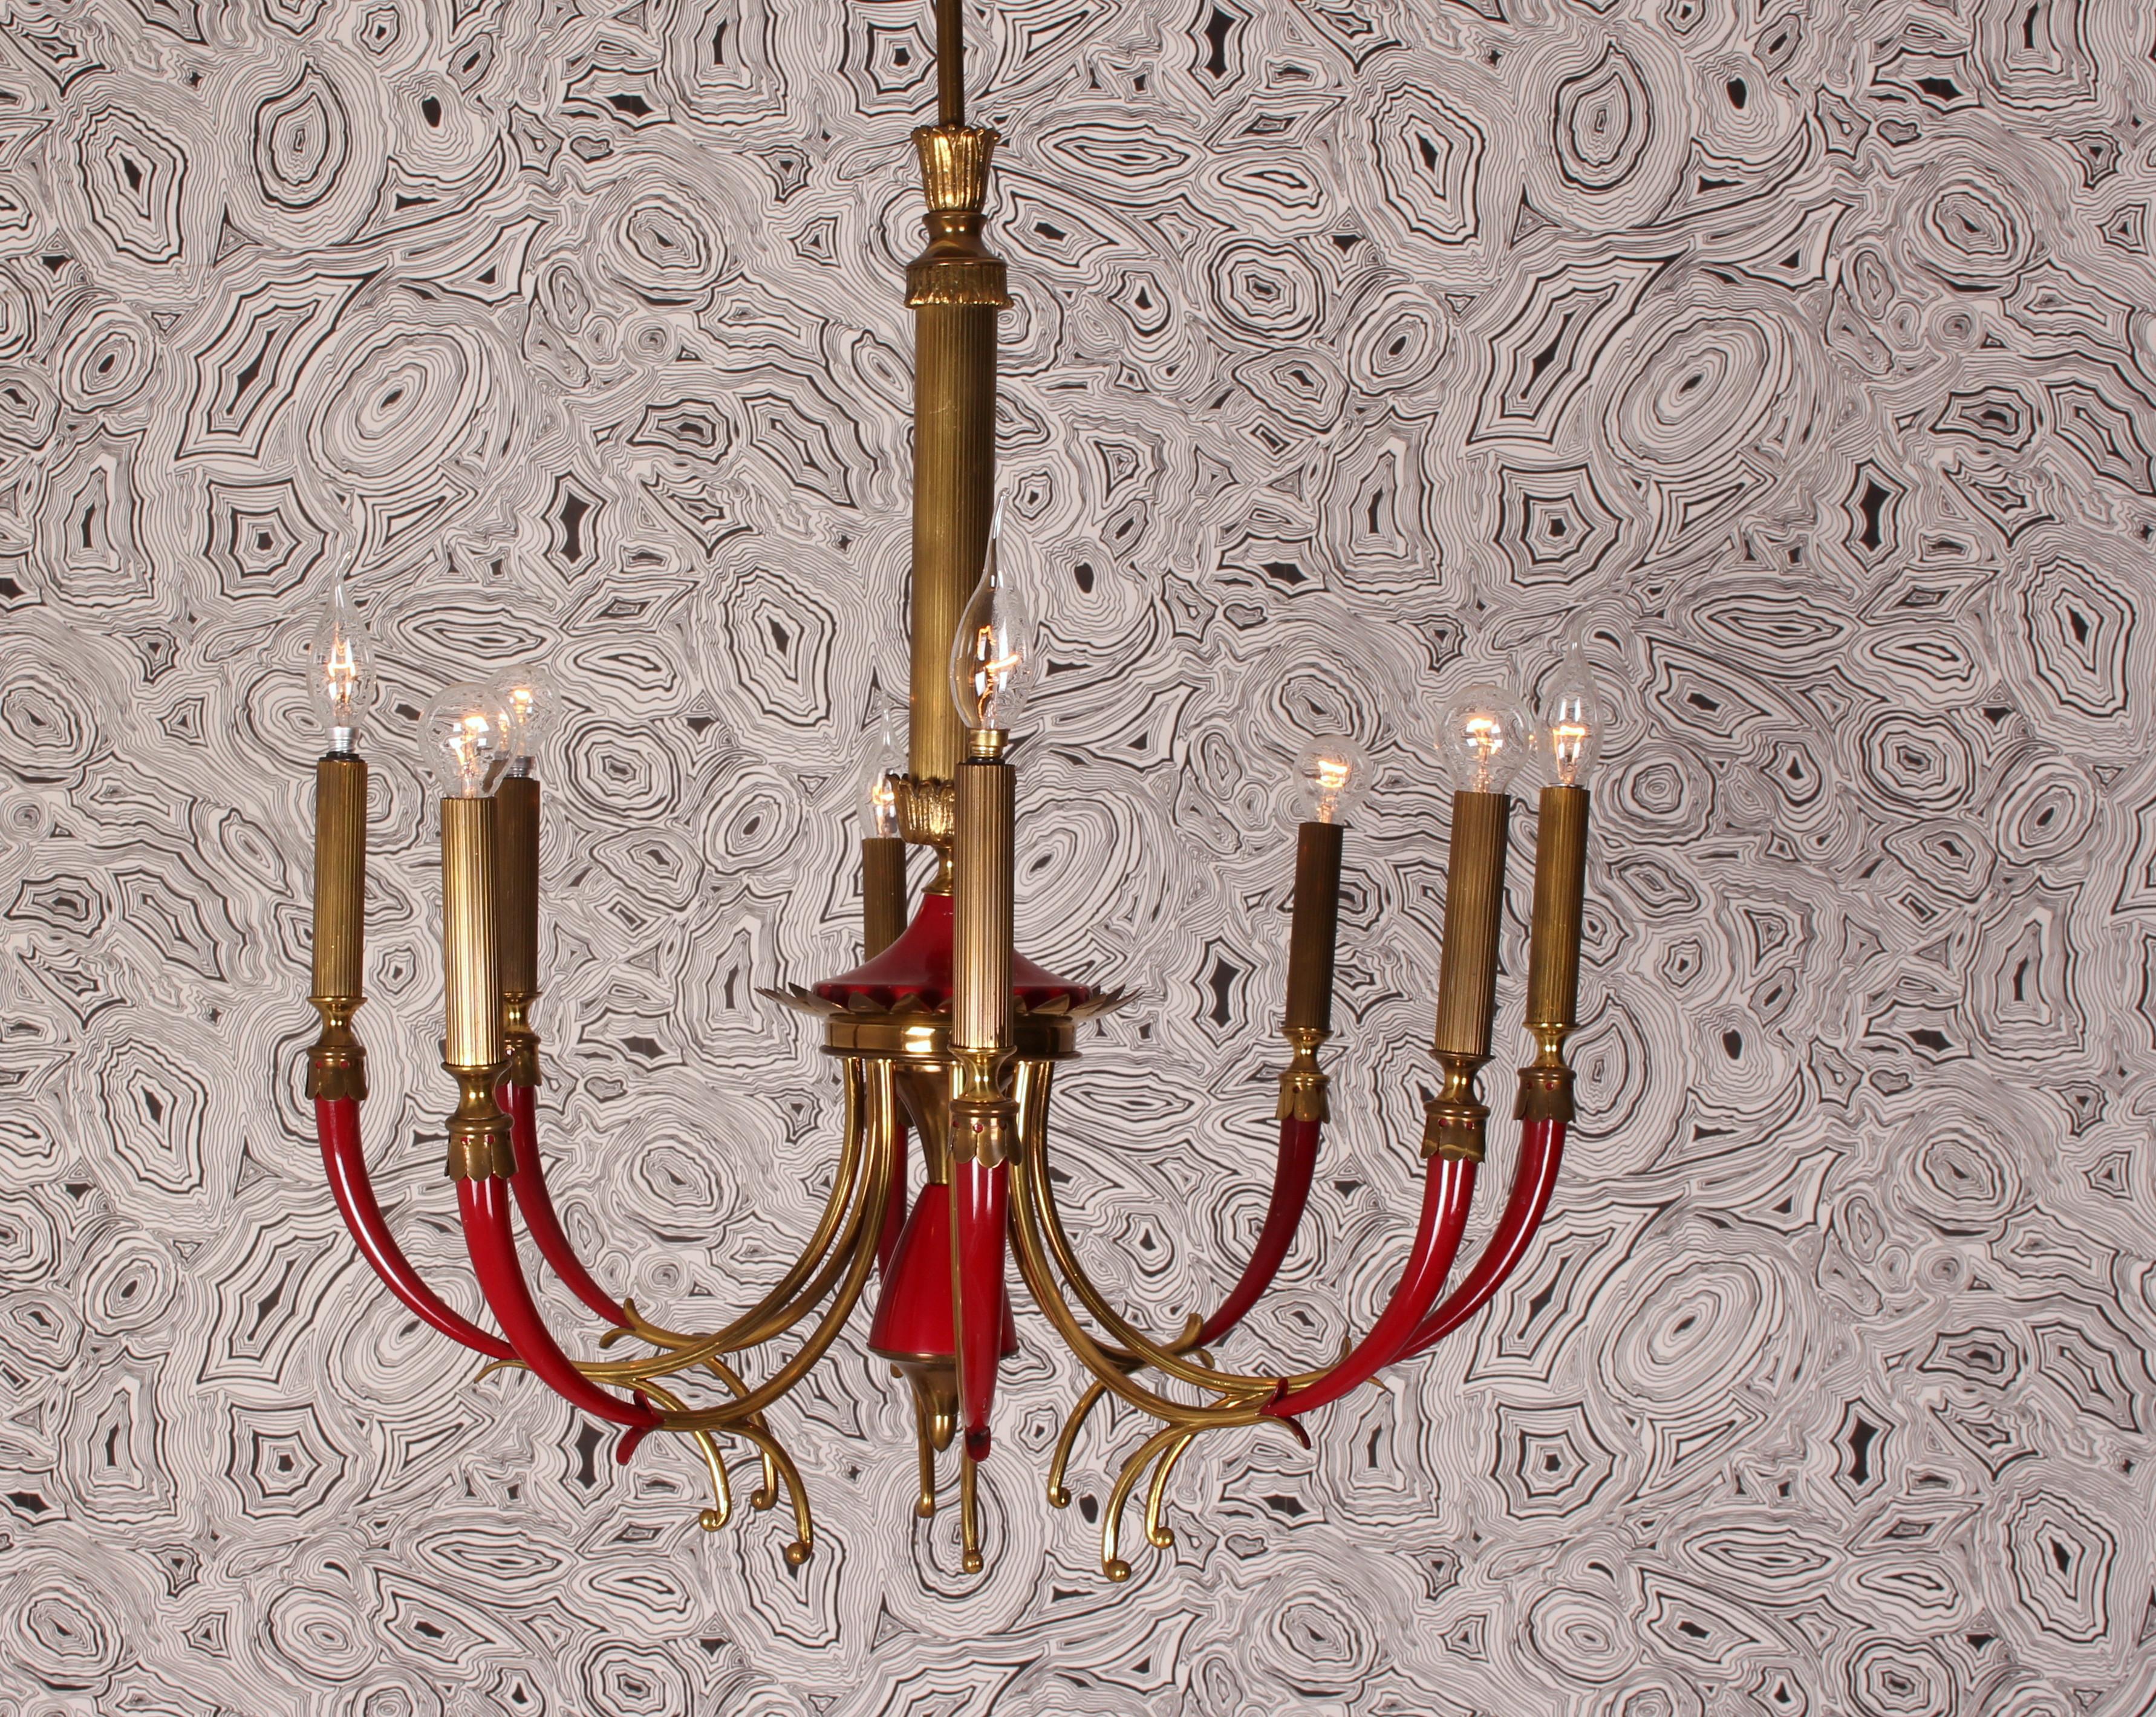 Laque Pietro Chiesa 1940s Solid Brass Venice Red Lacquered Italian Chandelier Arteluce